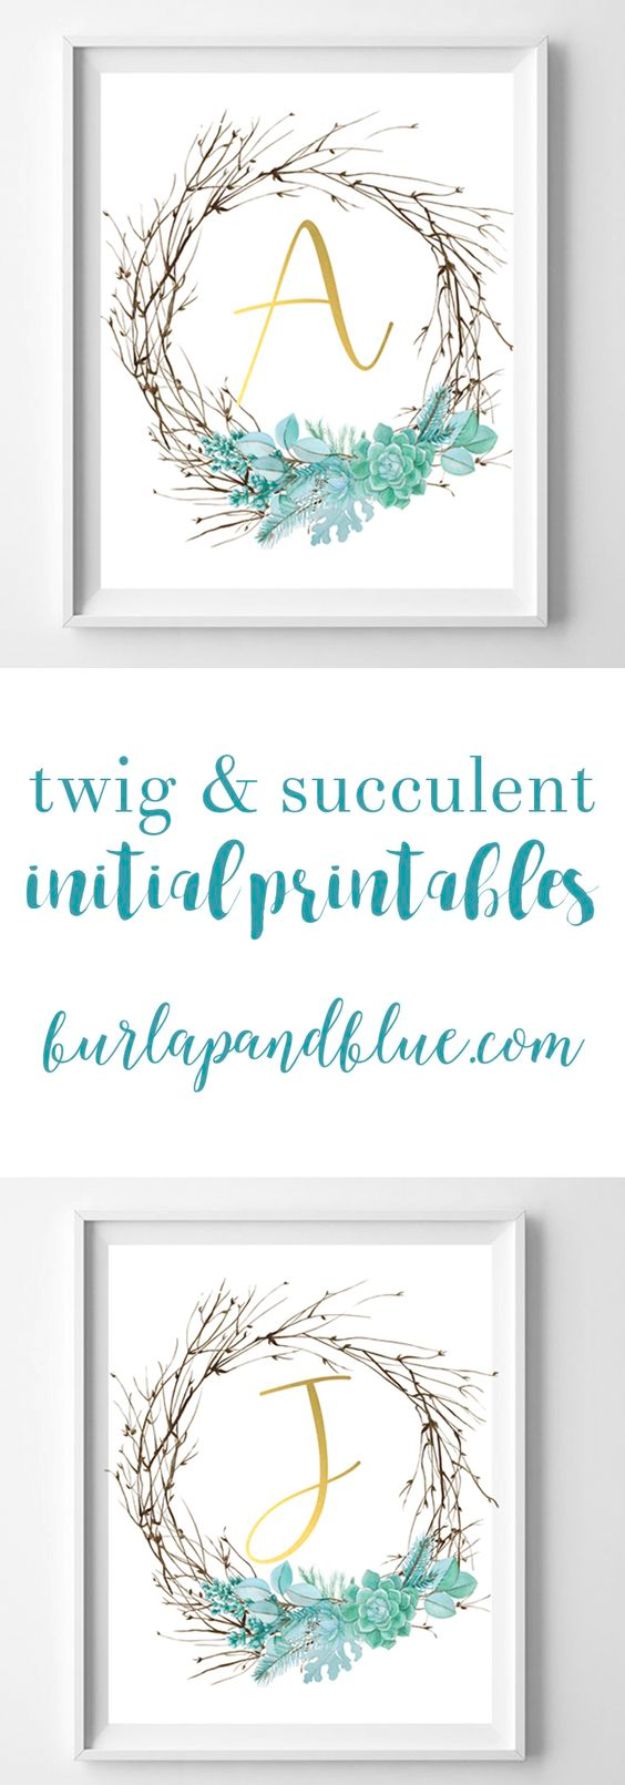 Free Printables For Your Walls - Twig And Succulent Initials Free Printables - Best Free Prints for Wall Art and Picture to Print for Home and Bedroom Decor - Ideas for the Home, Organization - Quotes for Bedroom and Kitchens, Vintage Bathroom Pictures - Downloadable Printable for Kids - DIY and Crafts by DIY JOY 